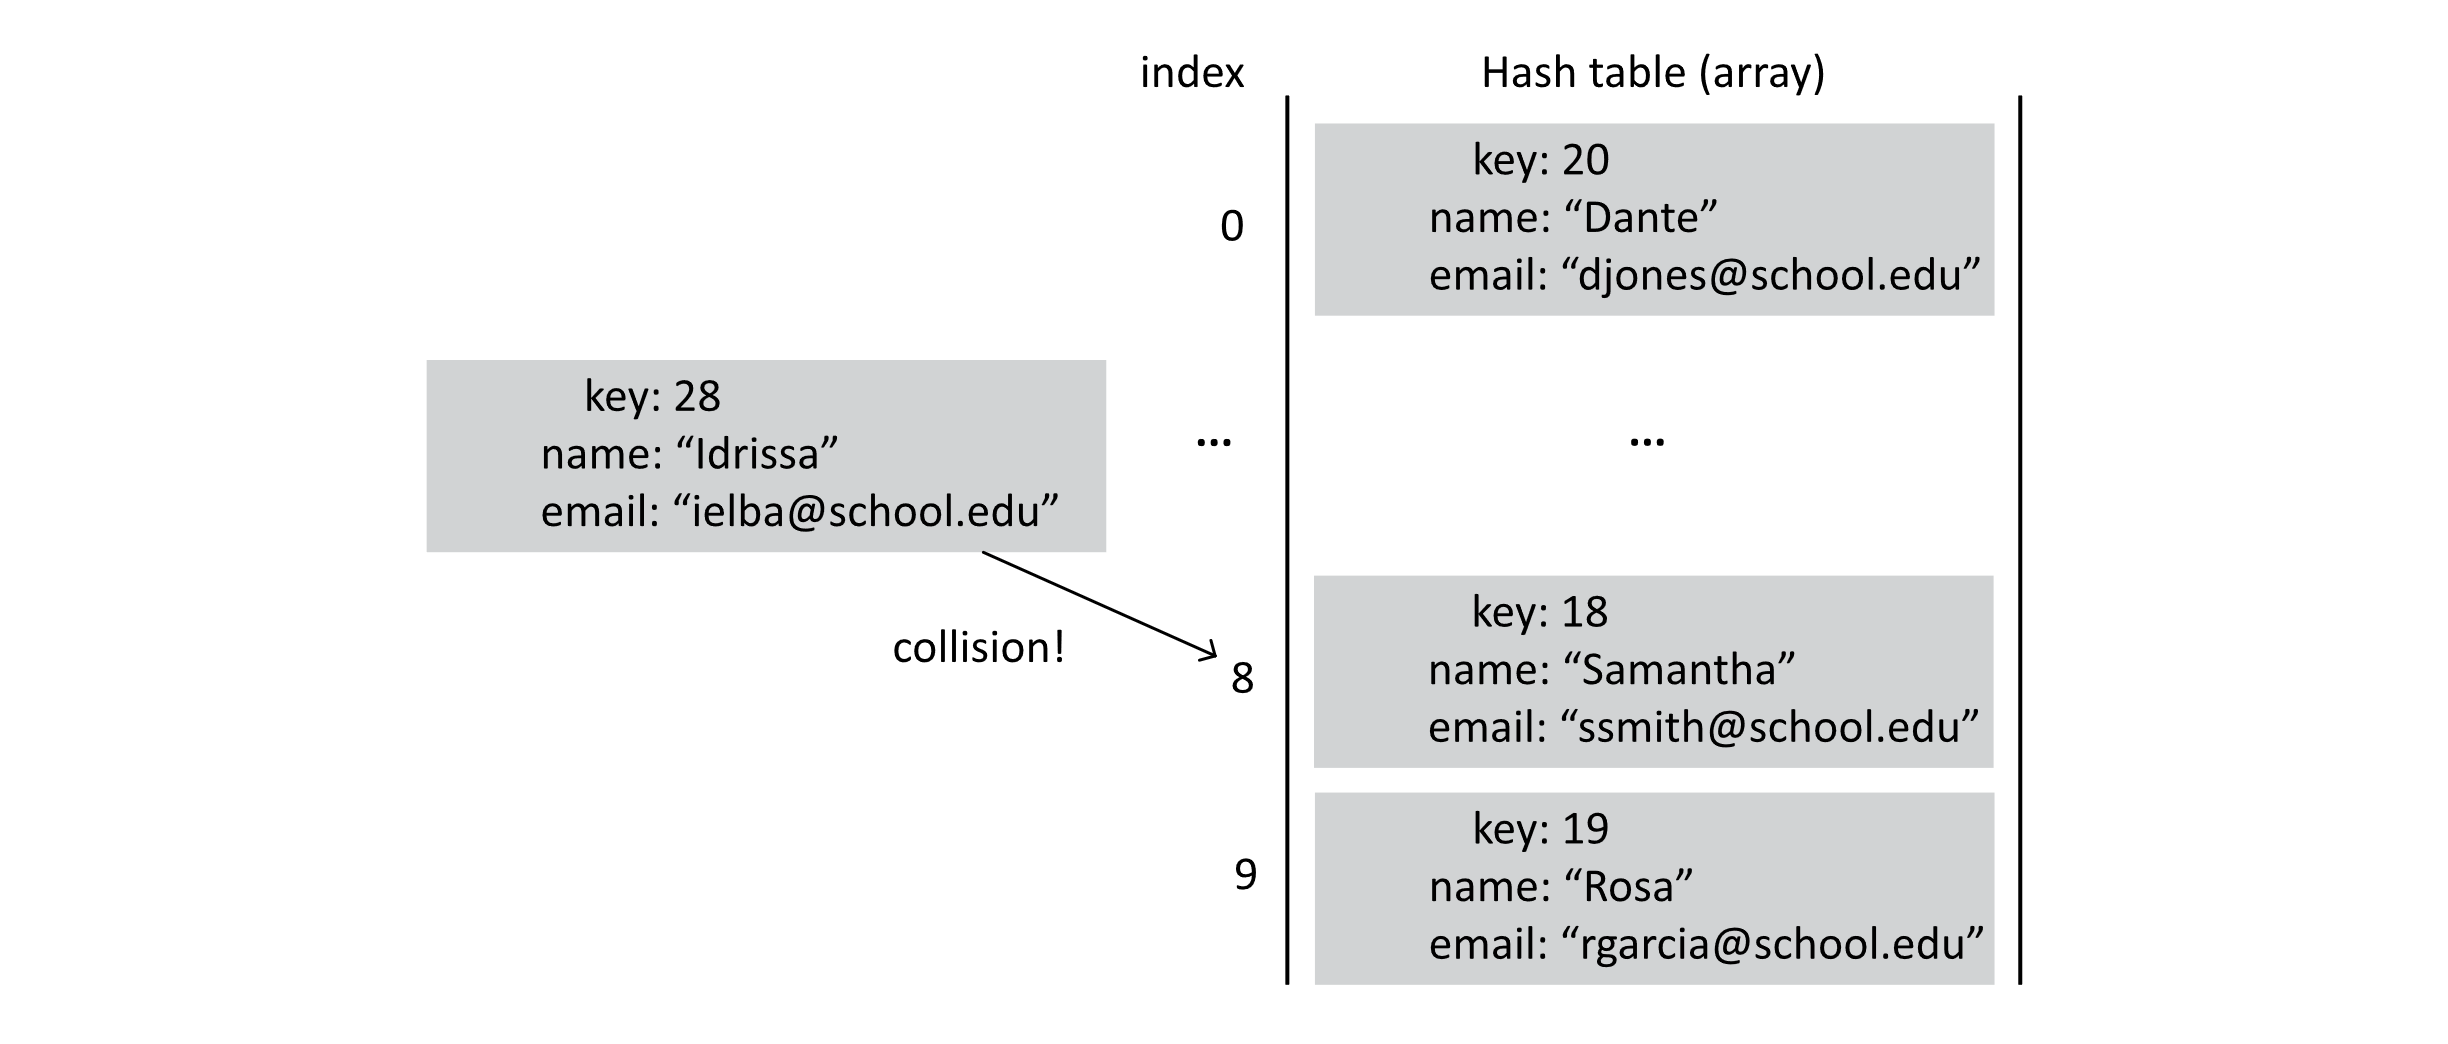 An array of student records representing a hash table. One record need to be inserted, but its space is full. This gives a collision.